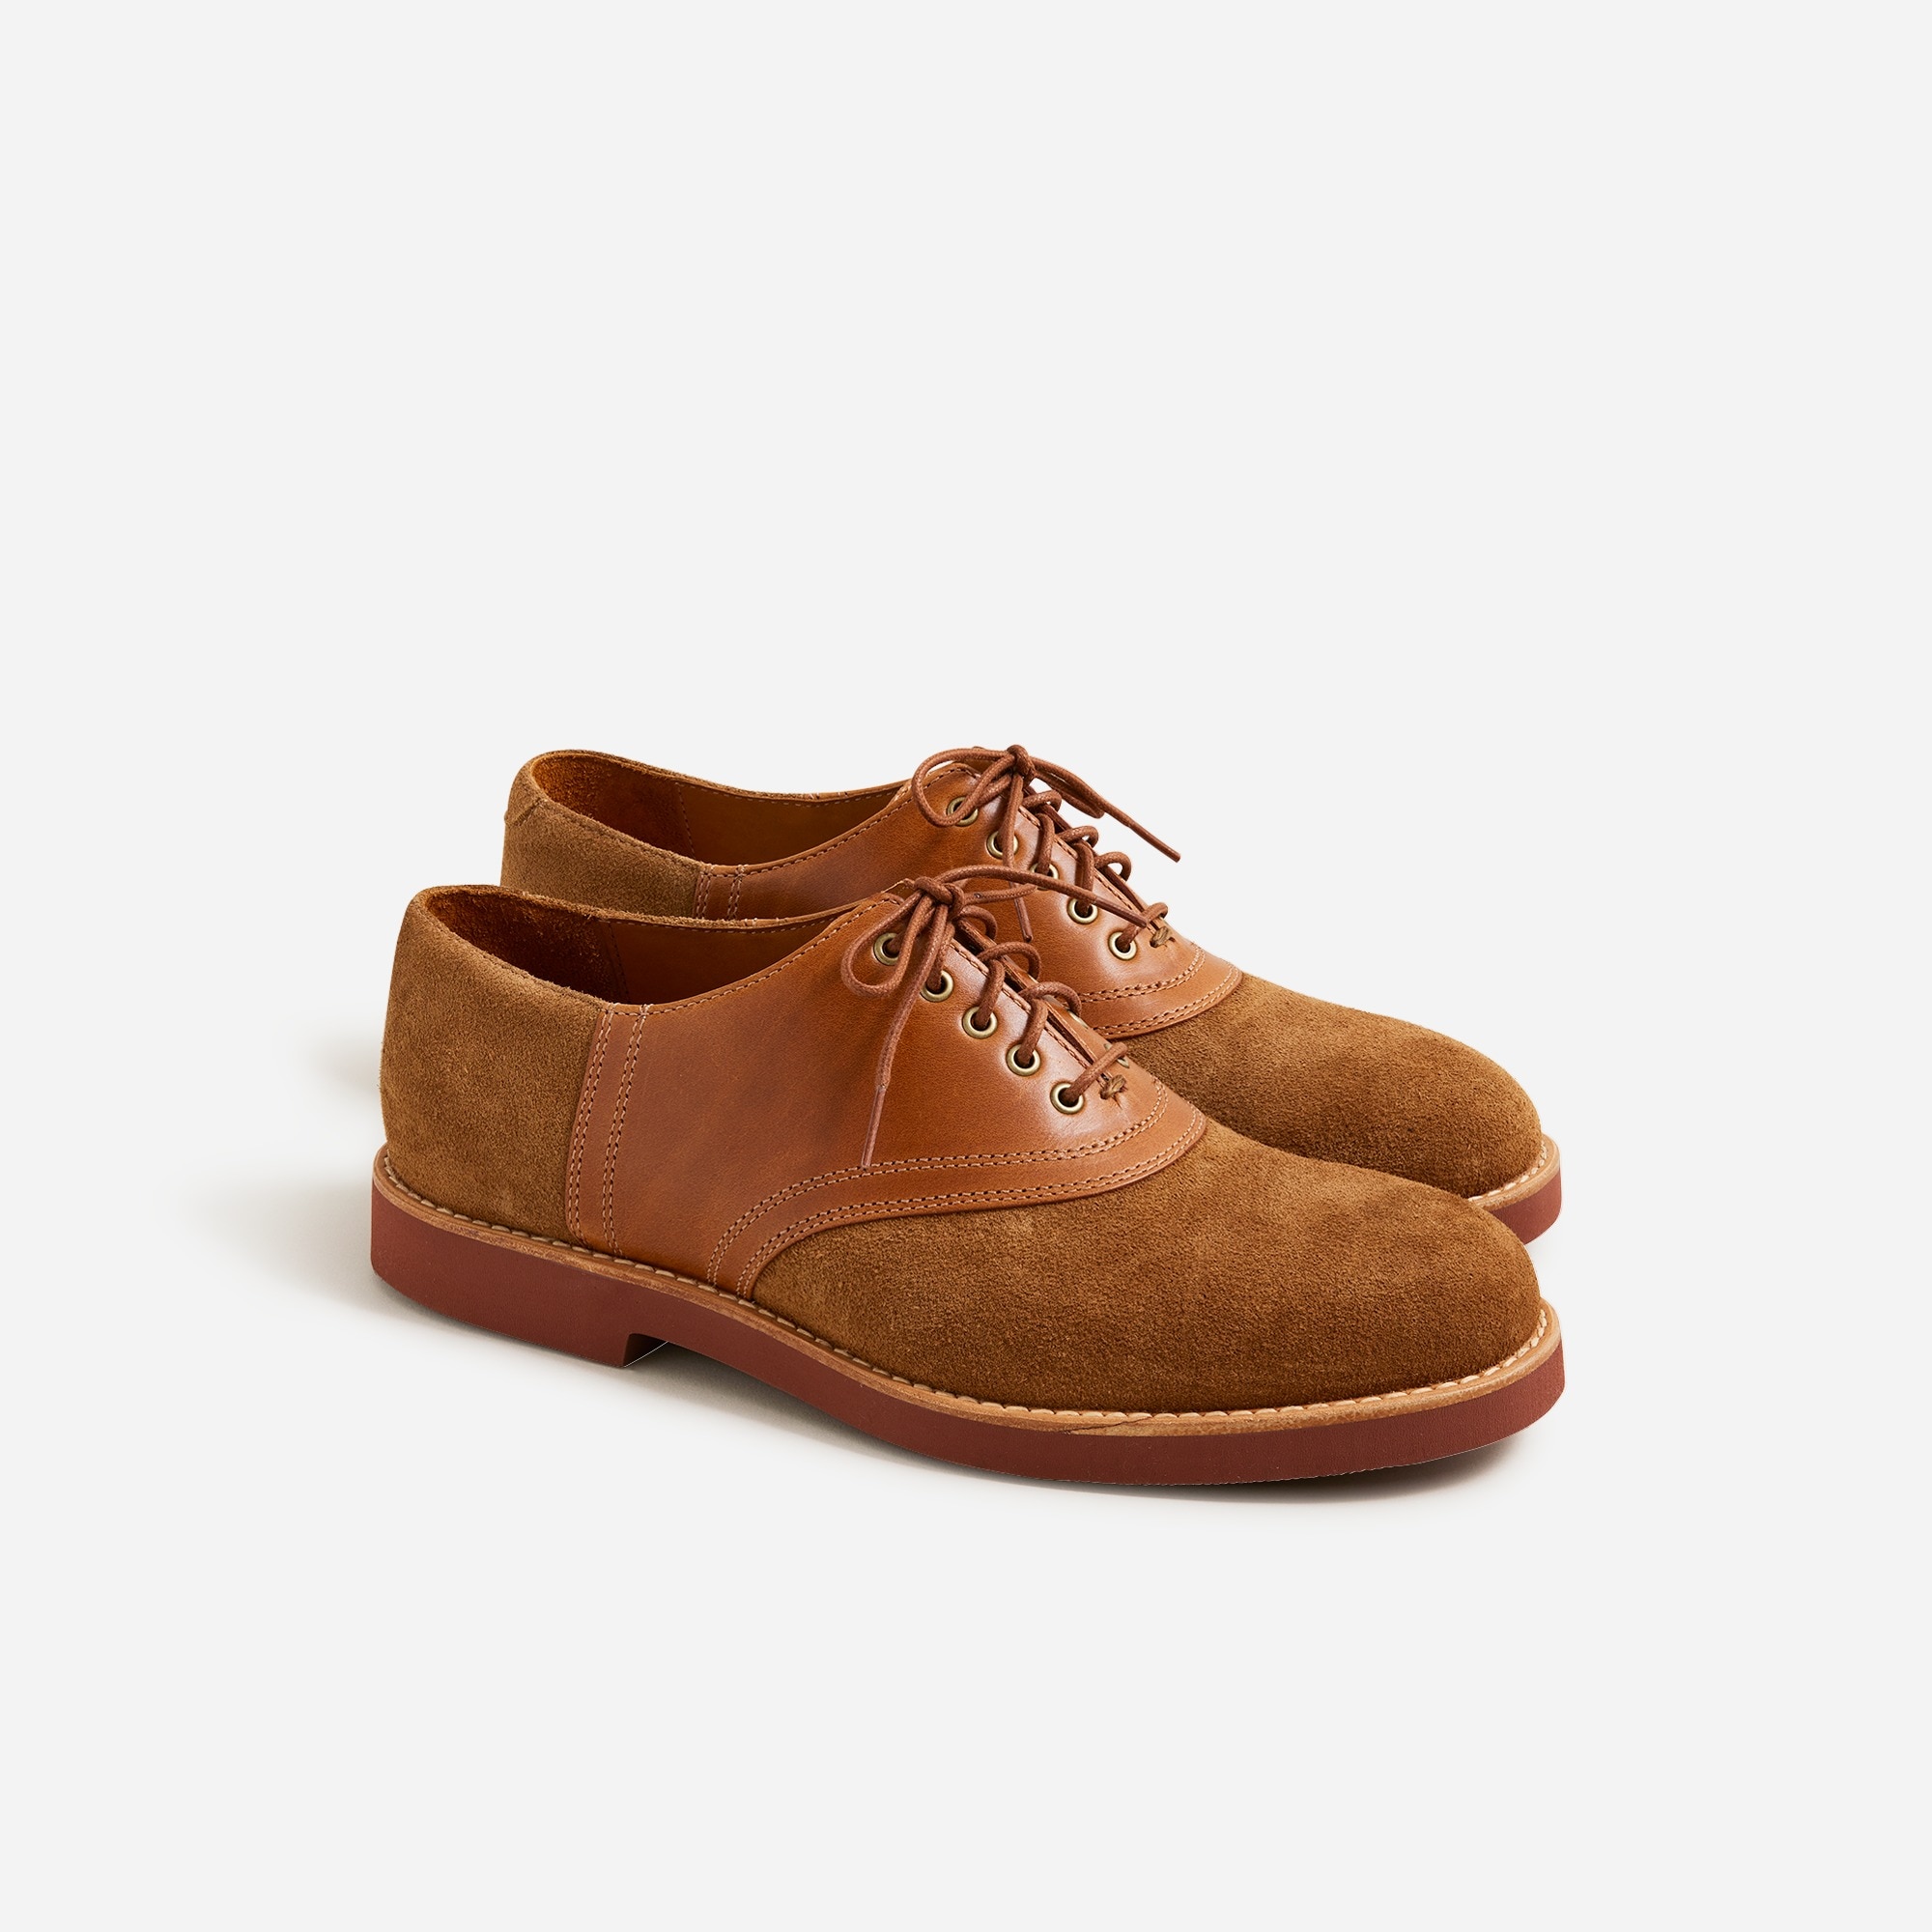 Jcrew Saddle shoes in leather and English suede